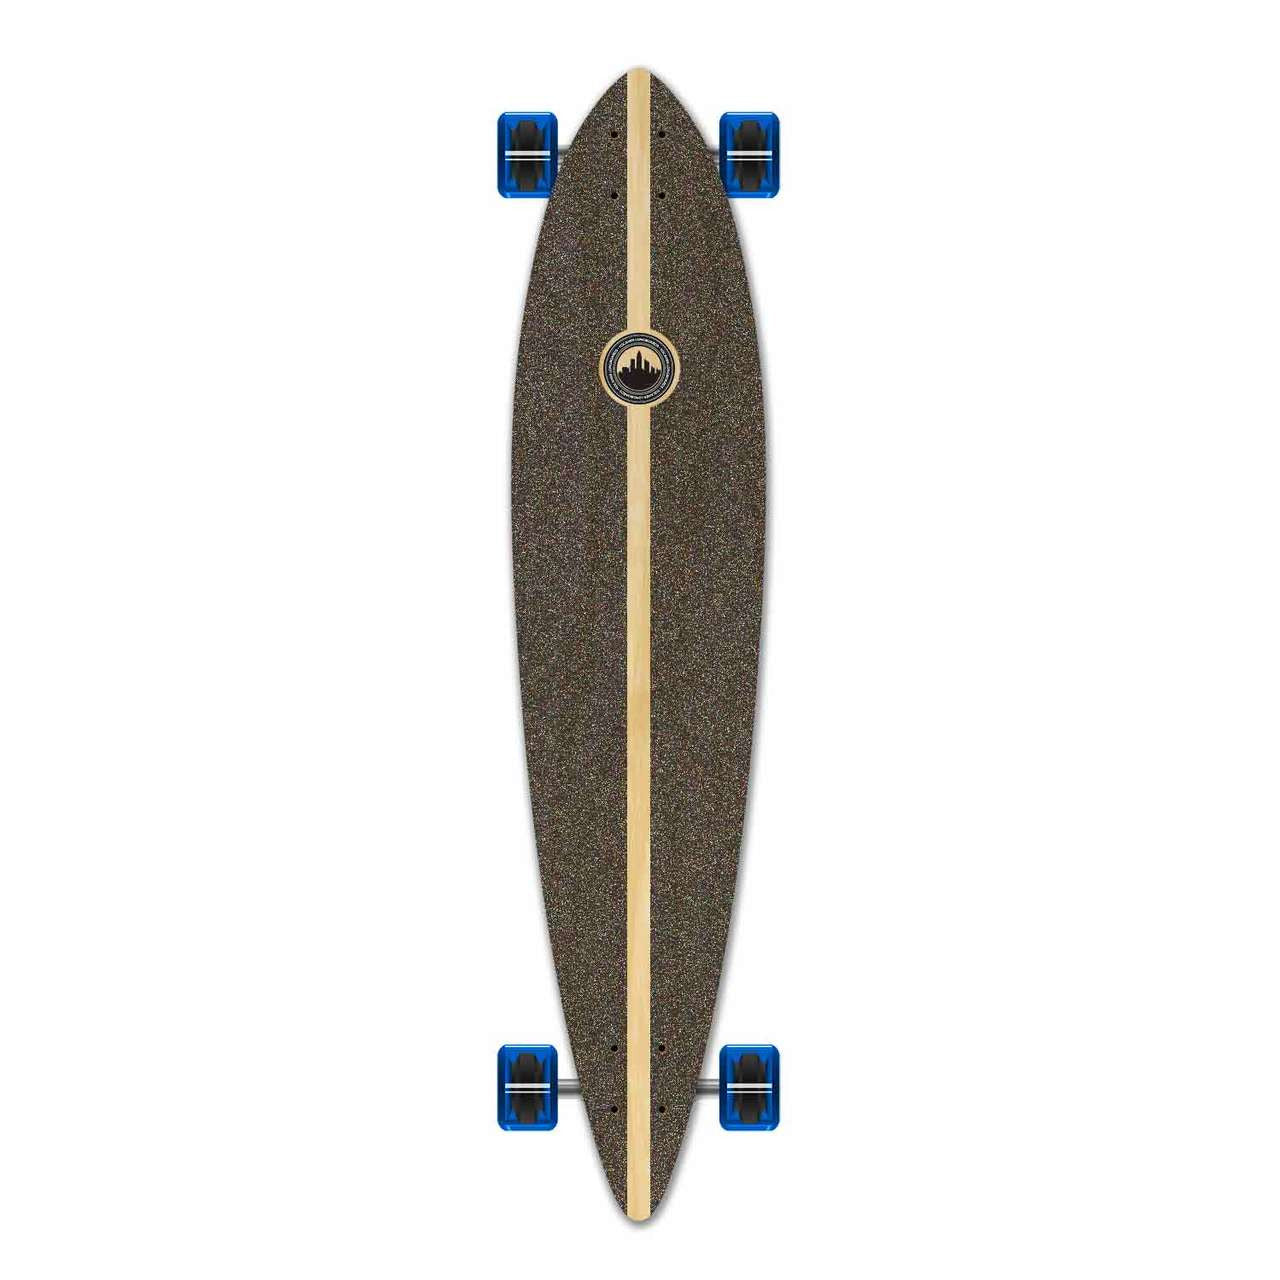 Yocaher Pintail Longboard Complete - Natural Surfer